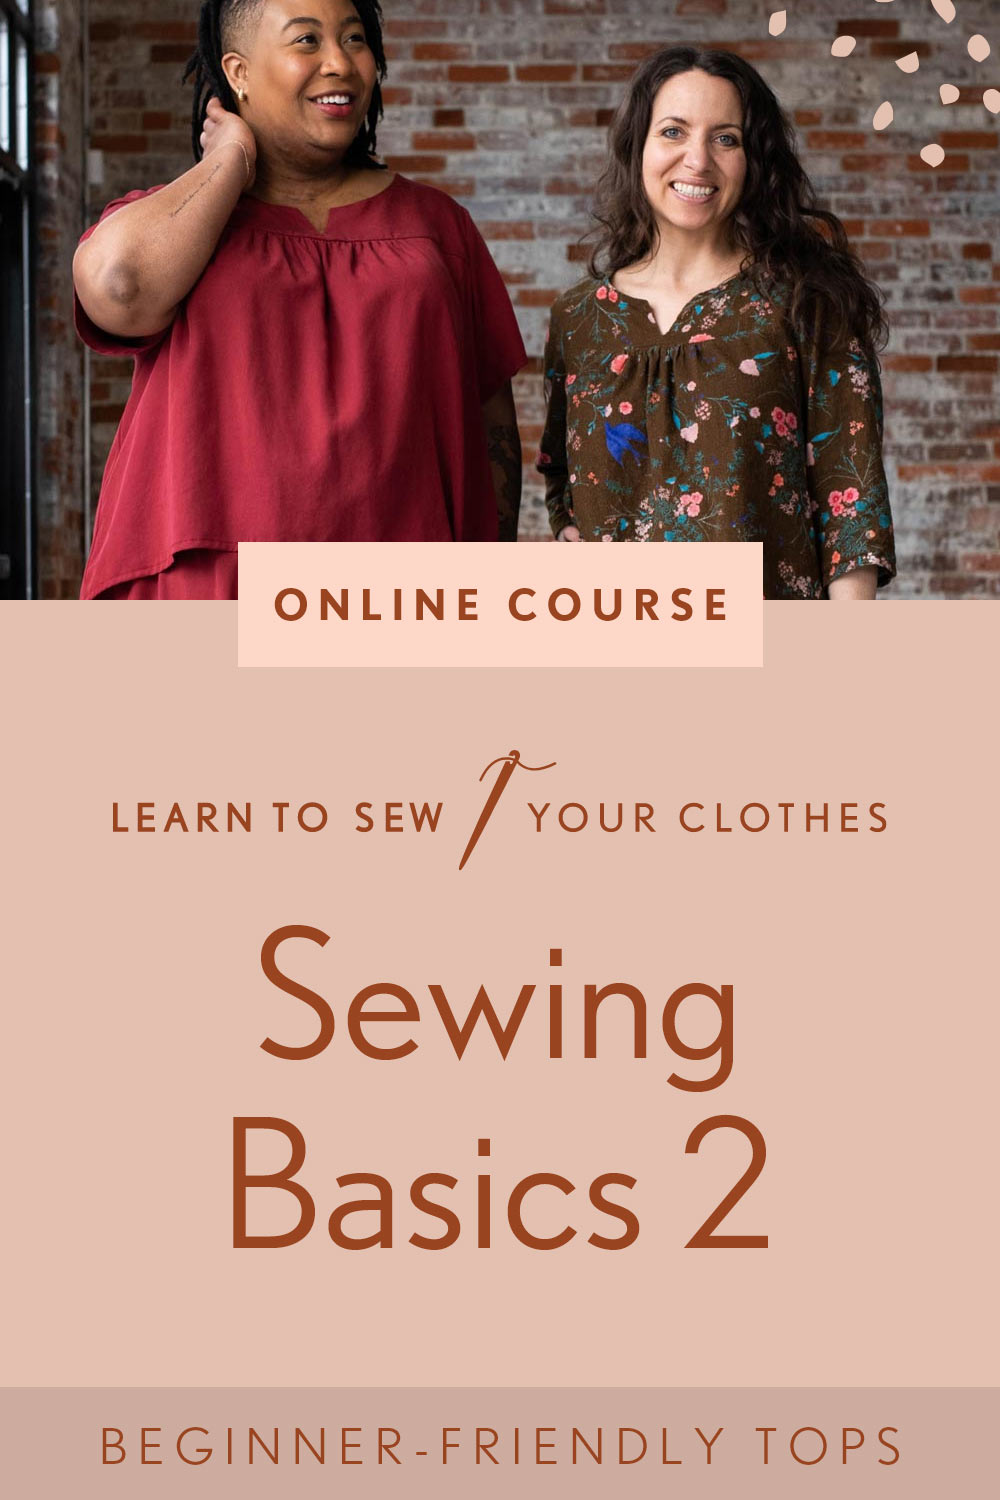 Sewing Basics 2 online course, featuring Meg and Ashley wearing Nocturne Tops